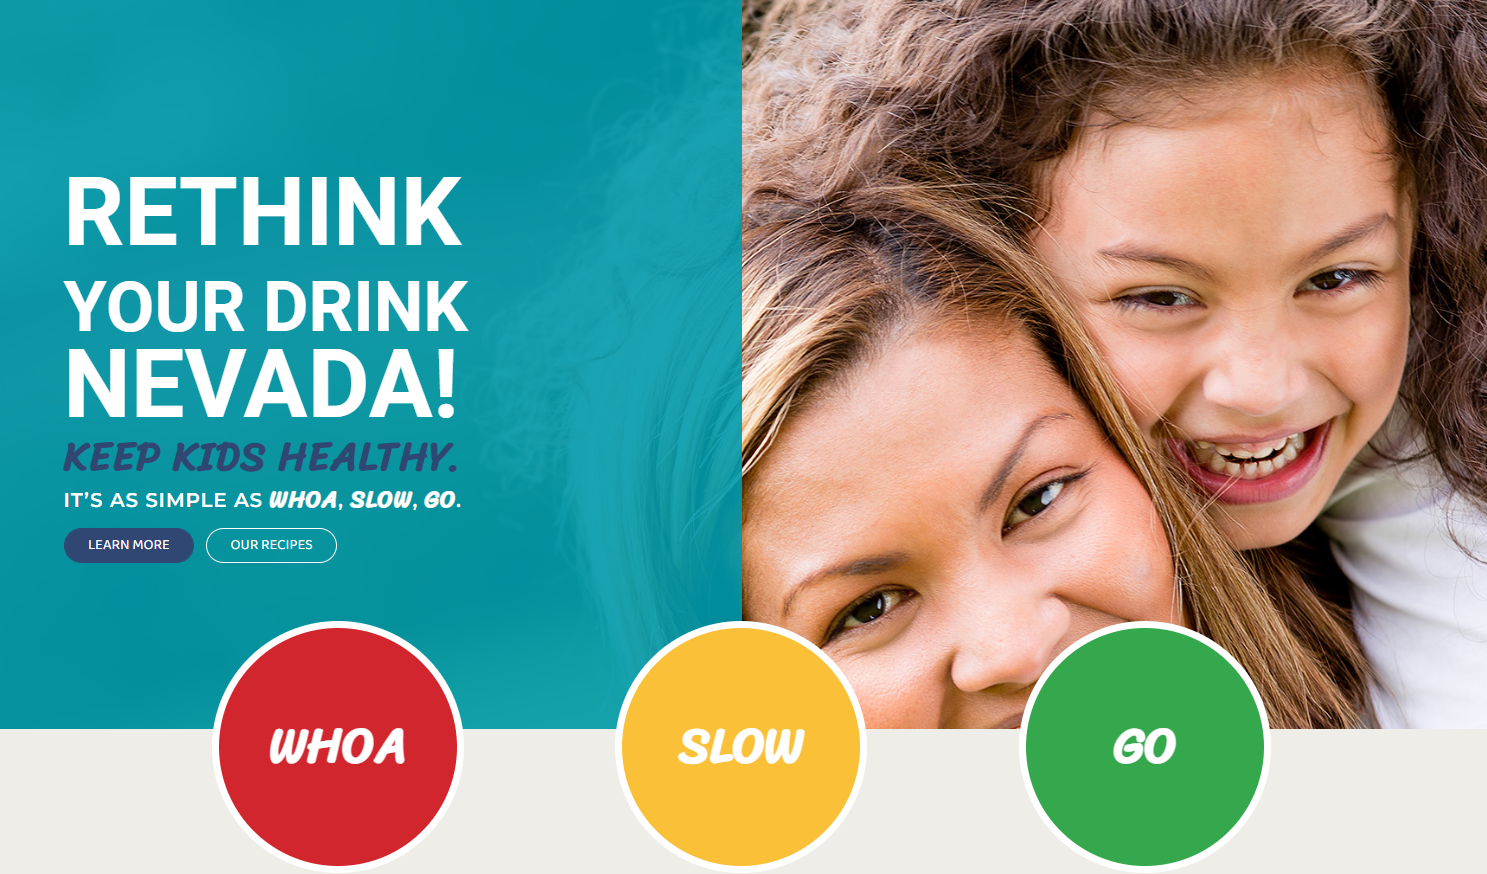 re-think your drink - keep kids healthy campaign photo with a mother and daughter 